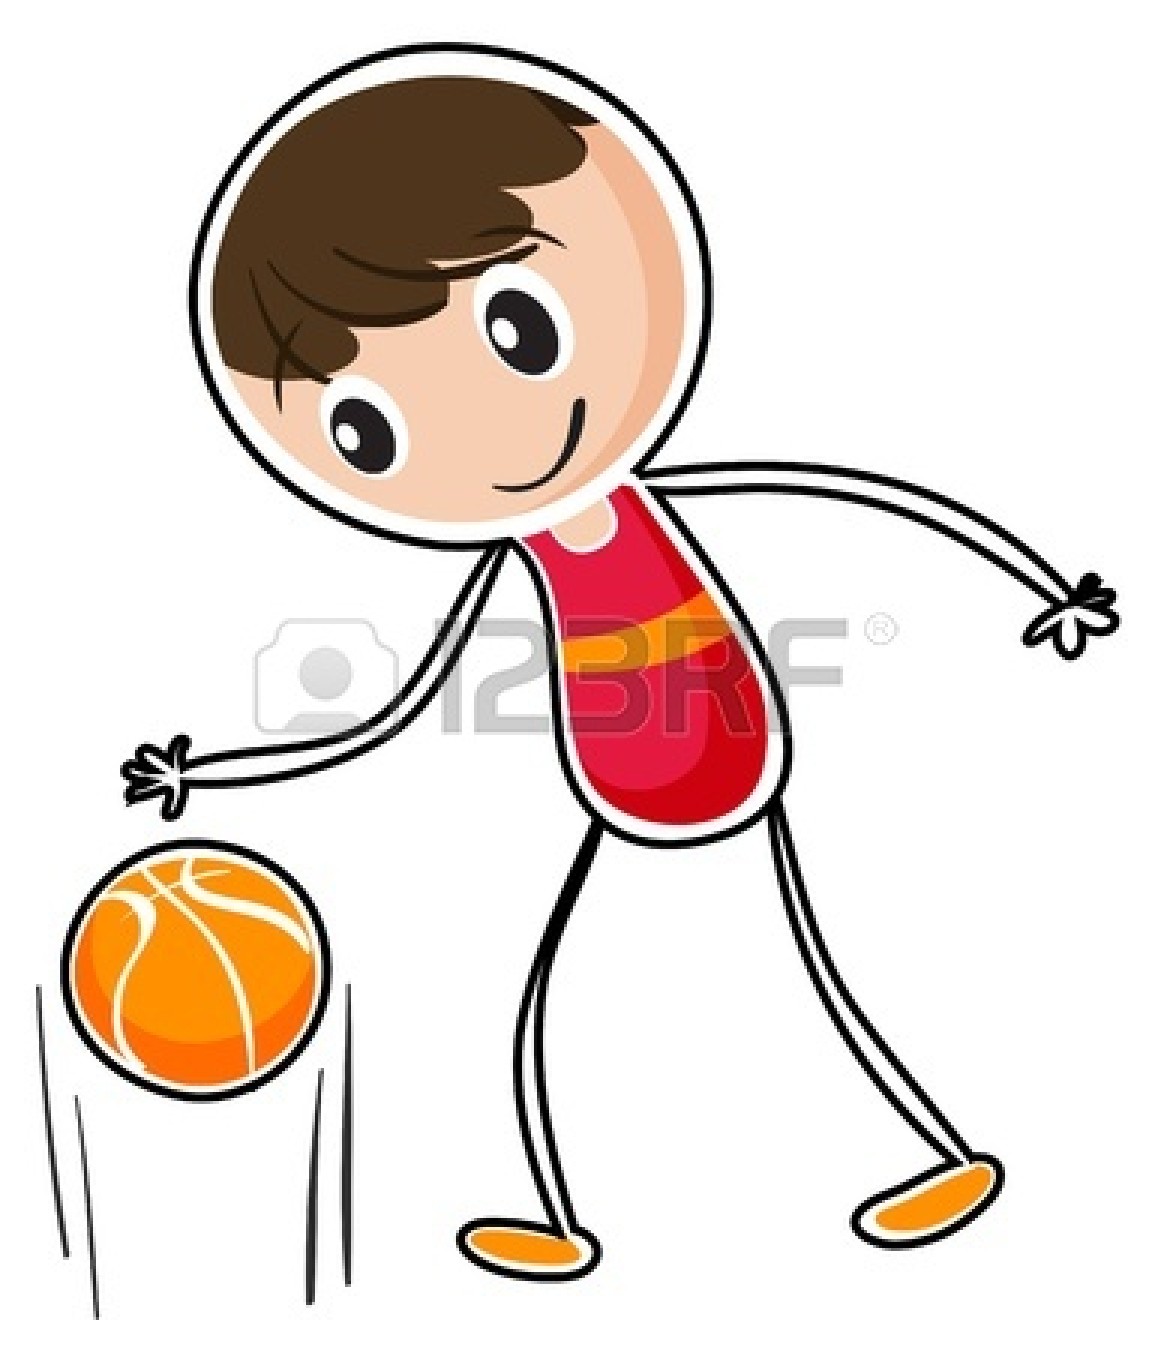 The Form Below To Delete This Bouncing Tennis Ball Clipart Image From